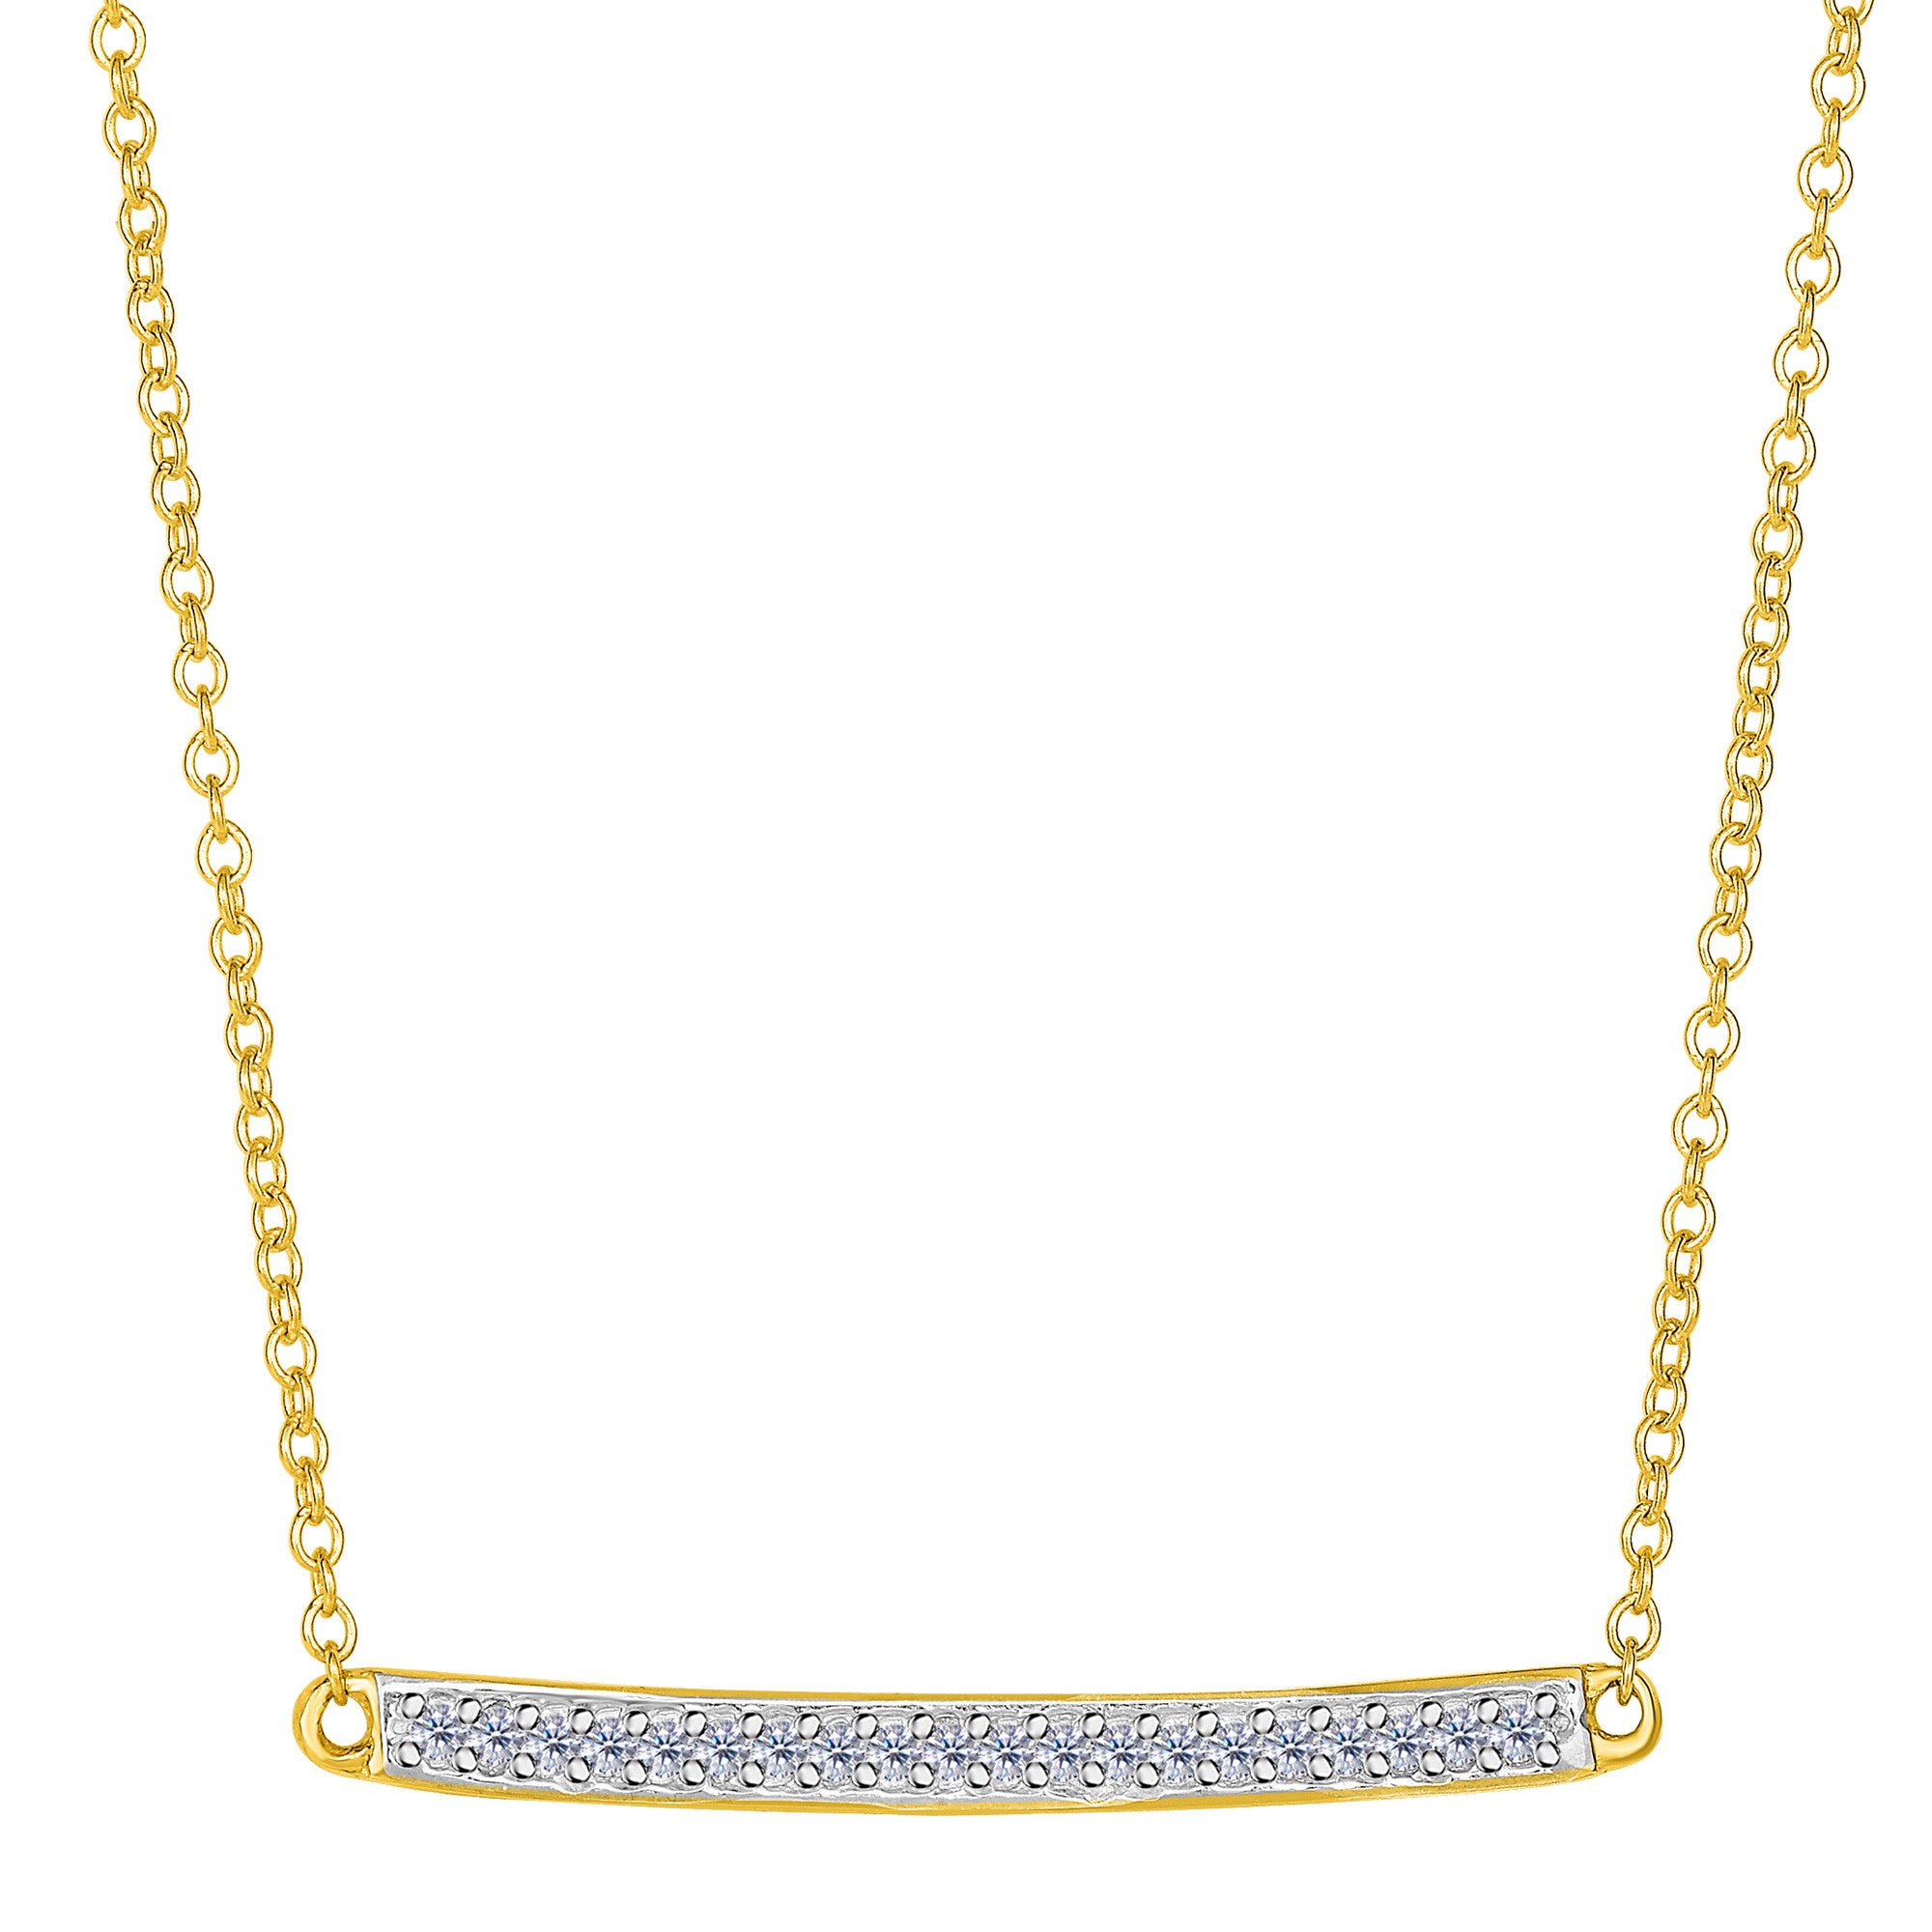 14k Yellow Gold 0.12Ct Diamond Bar Necklace - 18 Inch fine designer jewelry for men and women